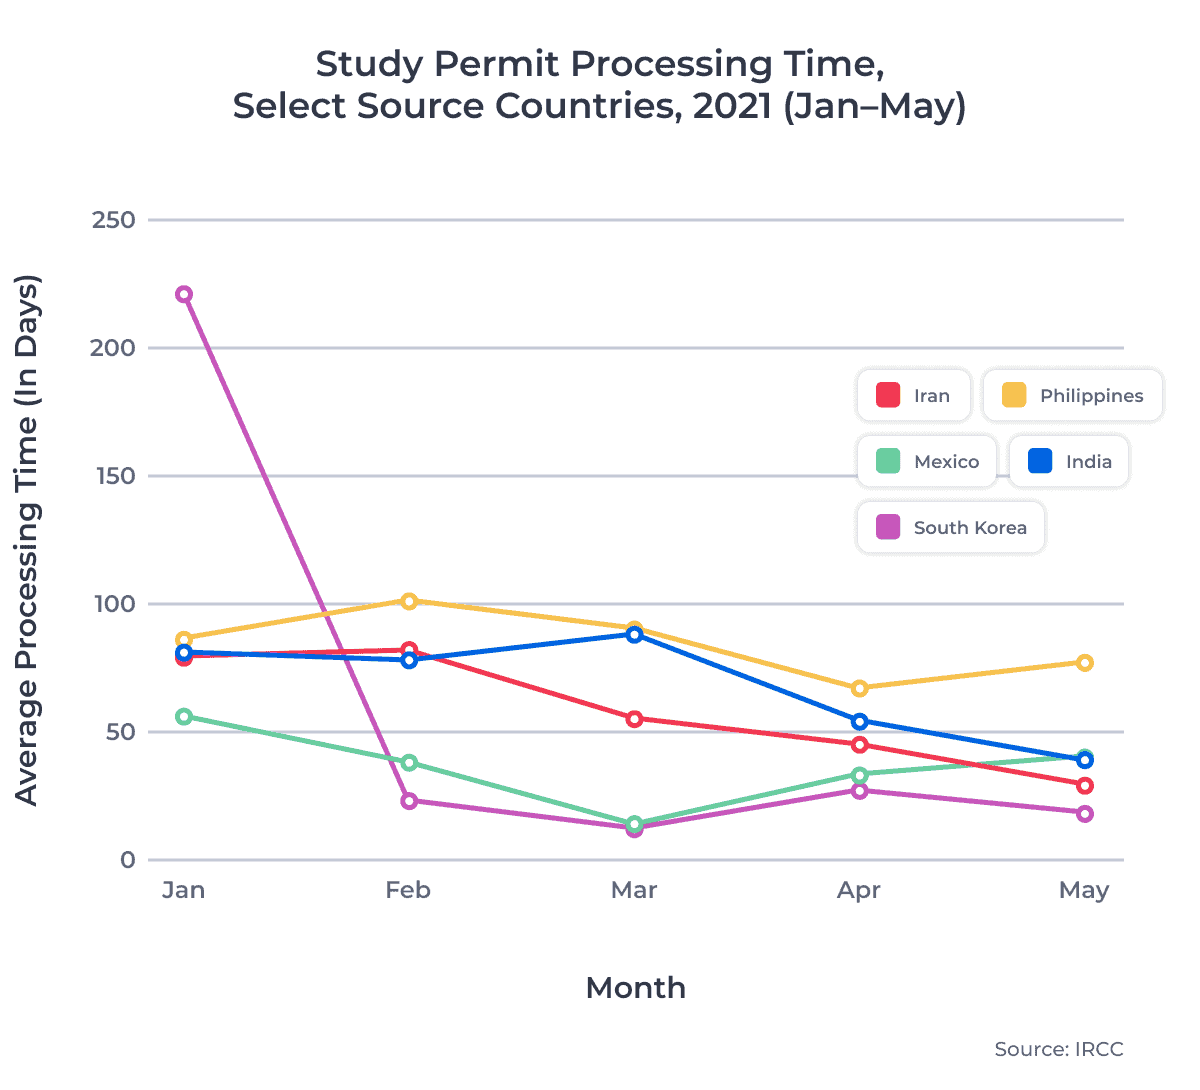 Shorter Canadian Permit Processing Times in 2021